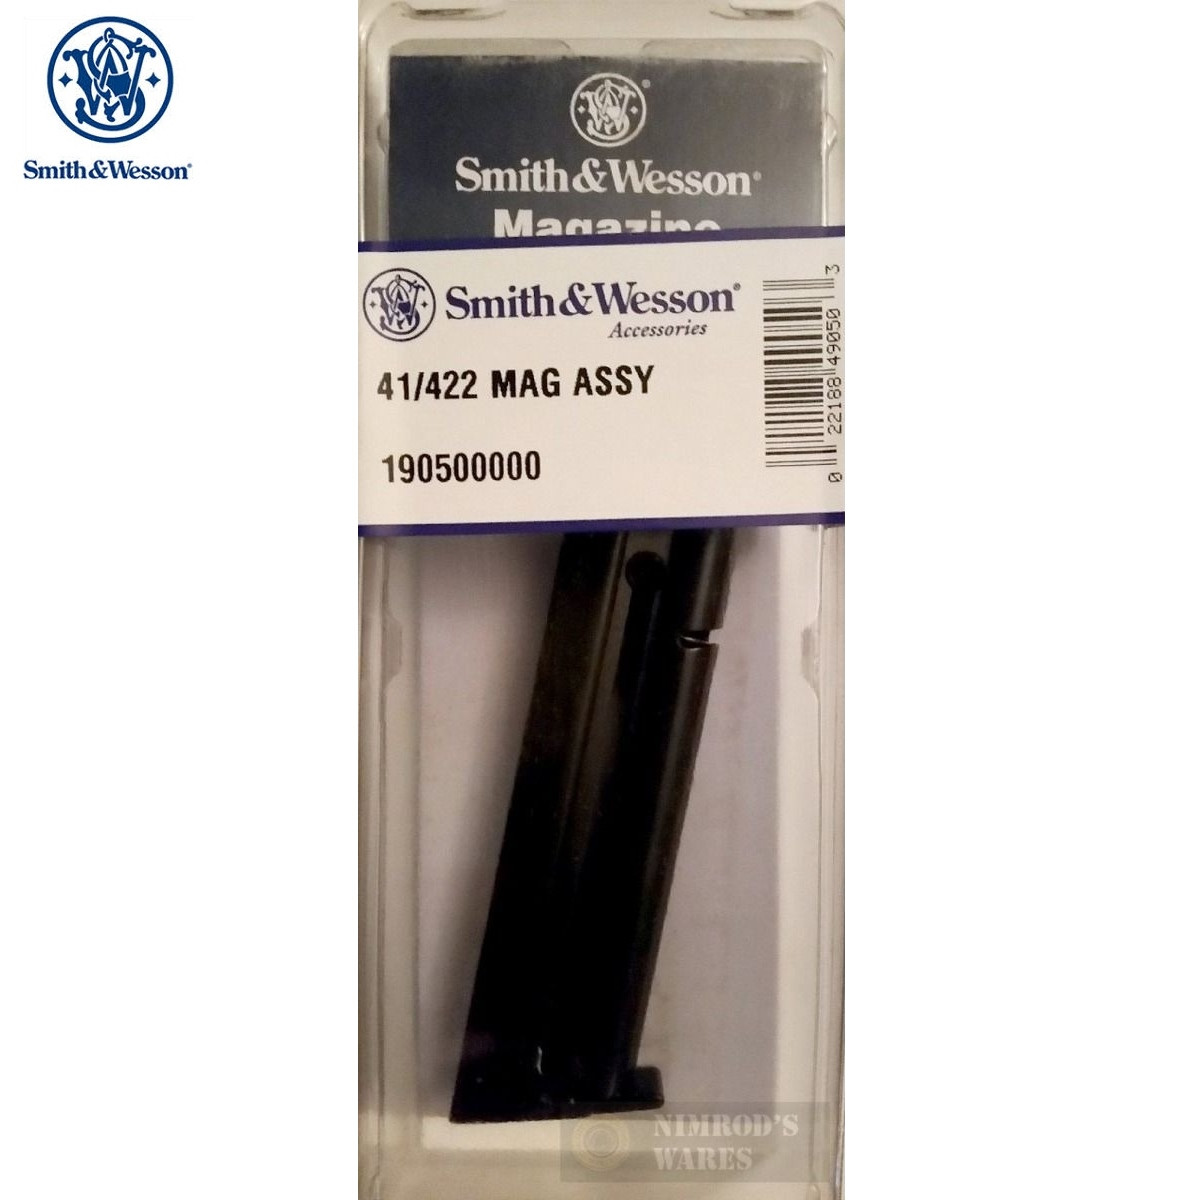 TWO Smith /& Wesson Model 41 Magazine 422 622 2206 22lr 10 Rd S/&W 41 clip 22 mag